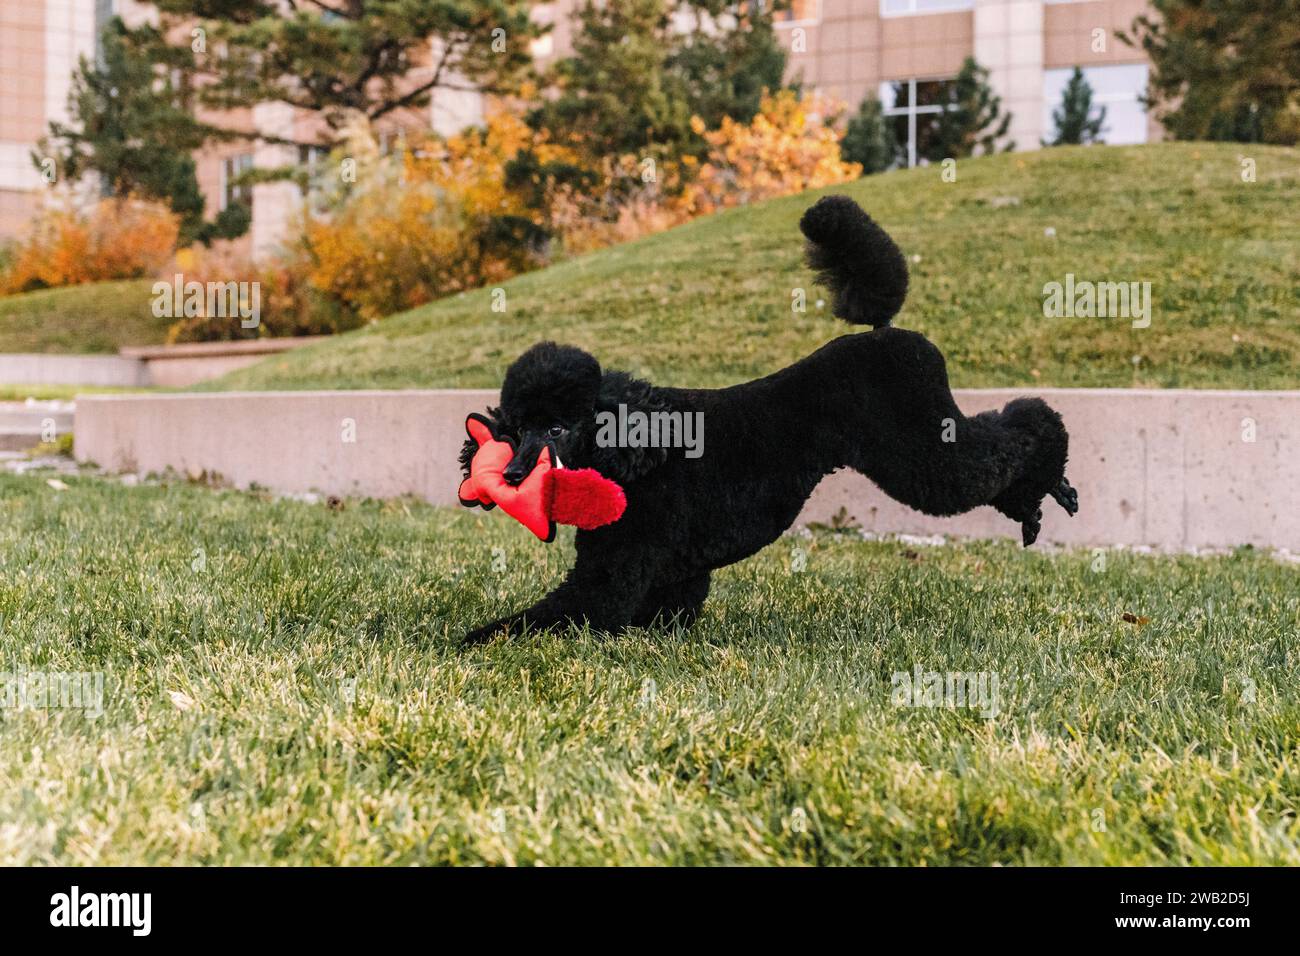 Black Miniature Poodle playing with toy in the grass in autumn Stock Photo